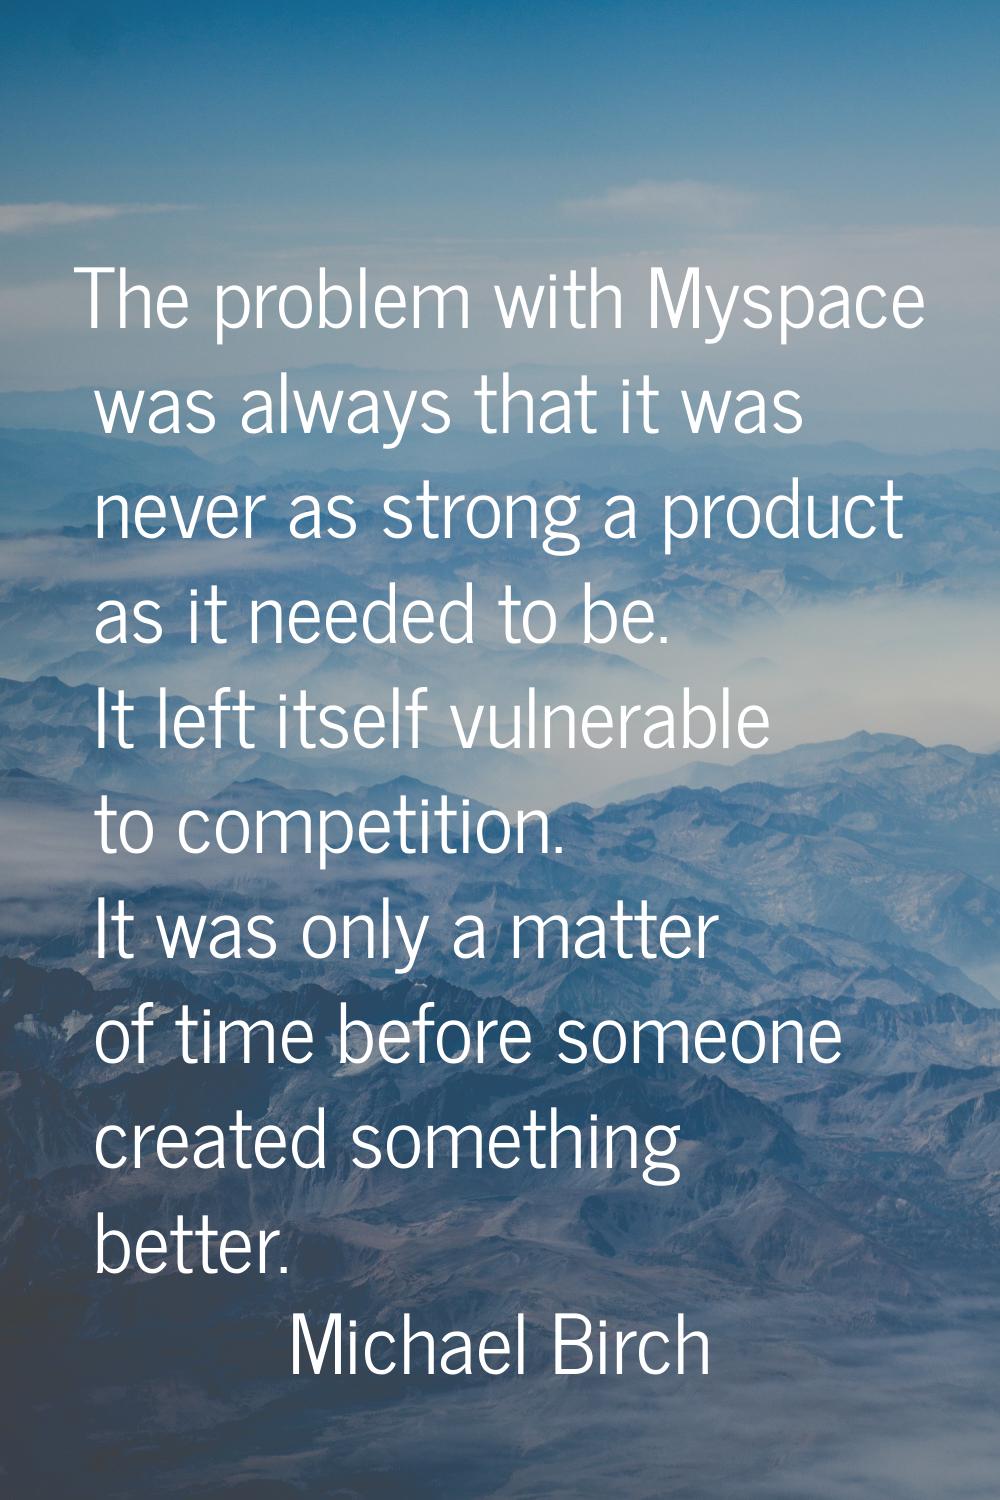 The problem with Myspace was always that it was never as strong a product as it needed to be. It le